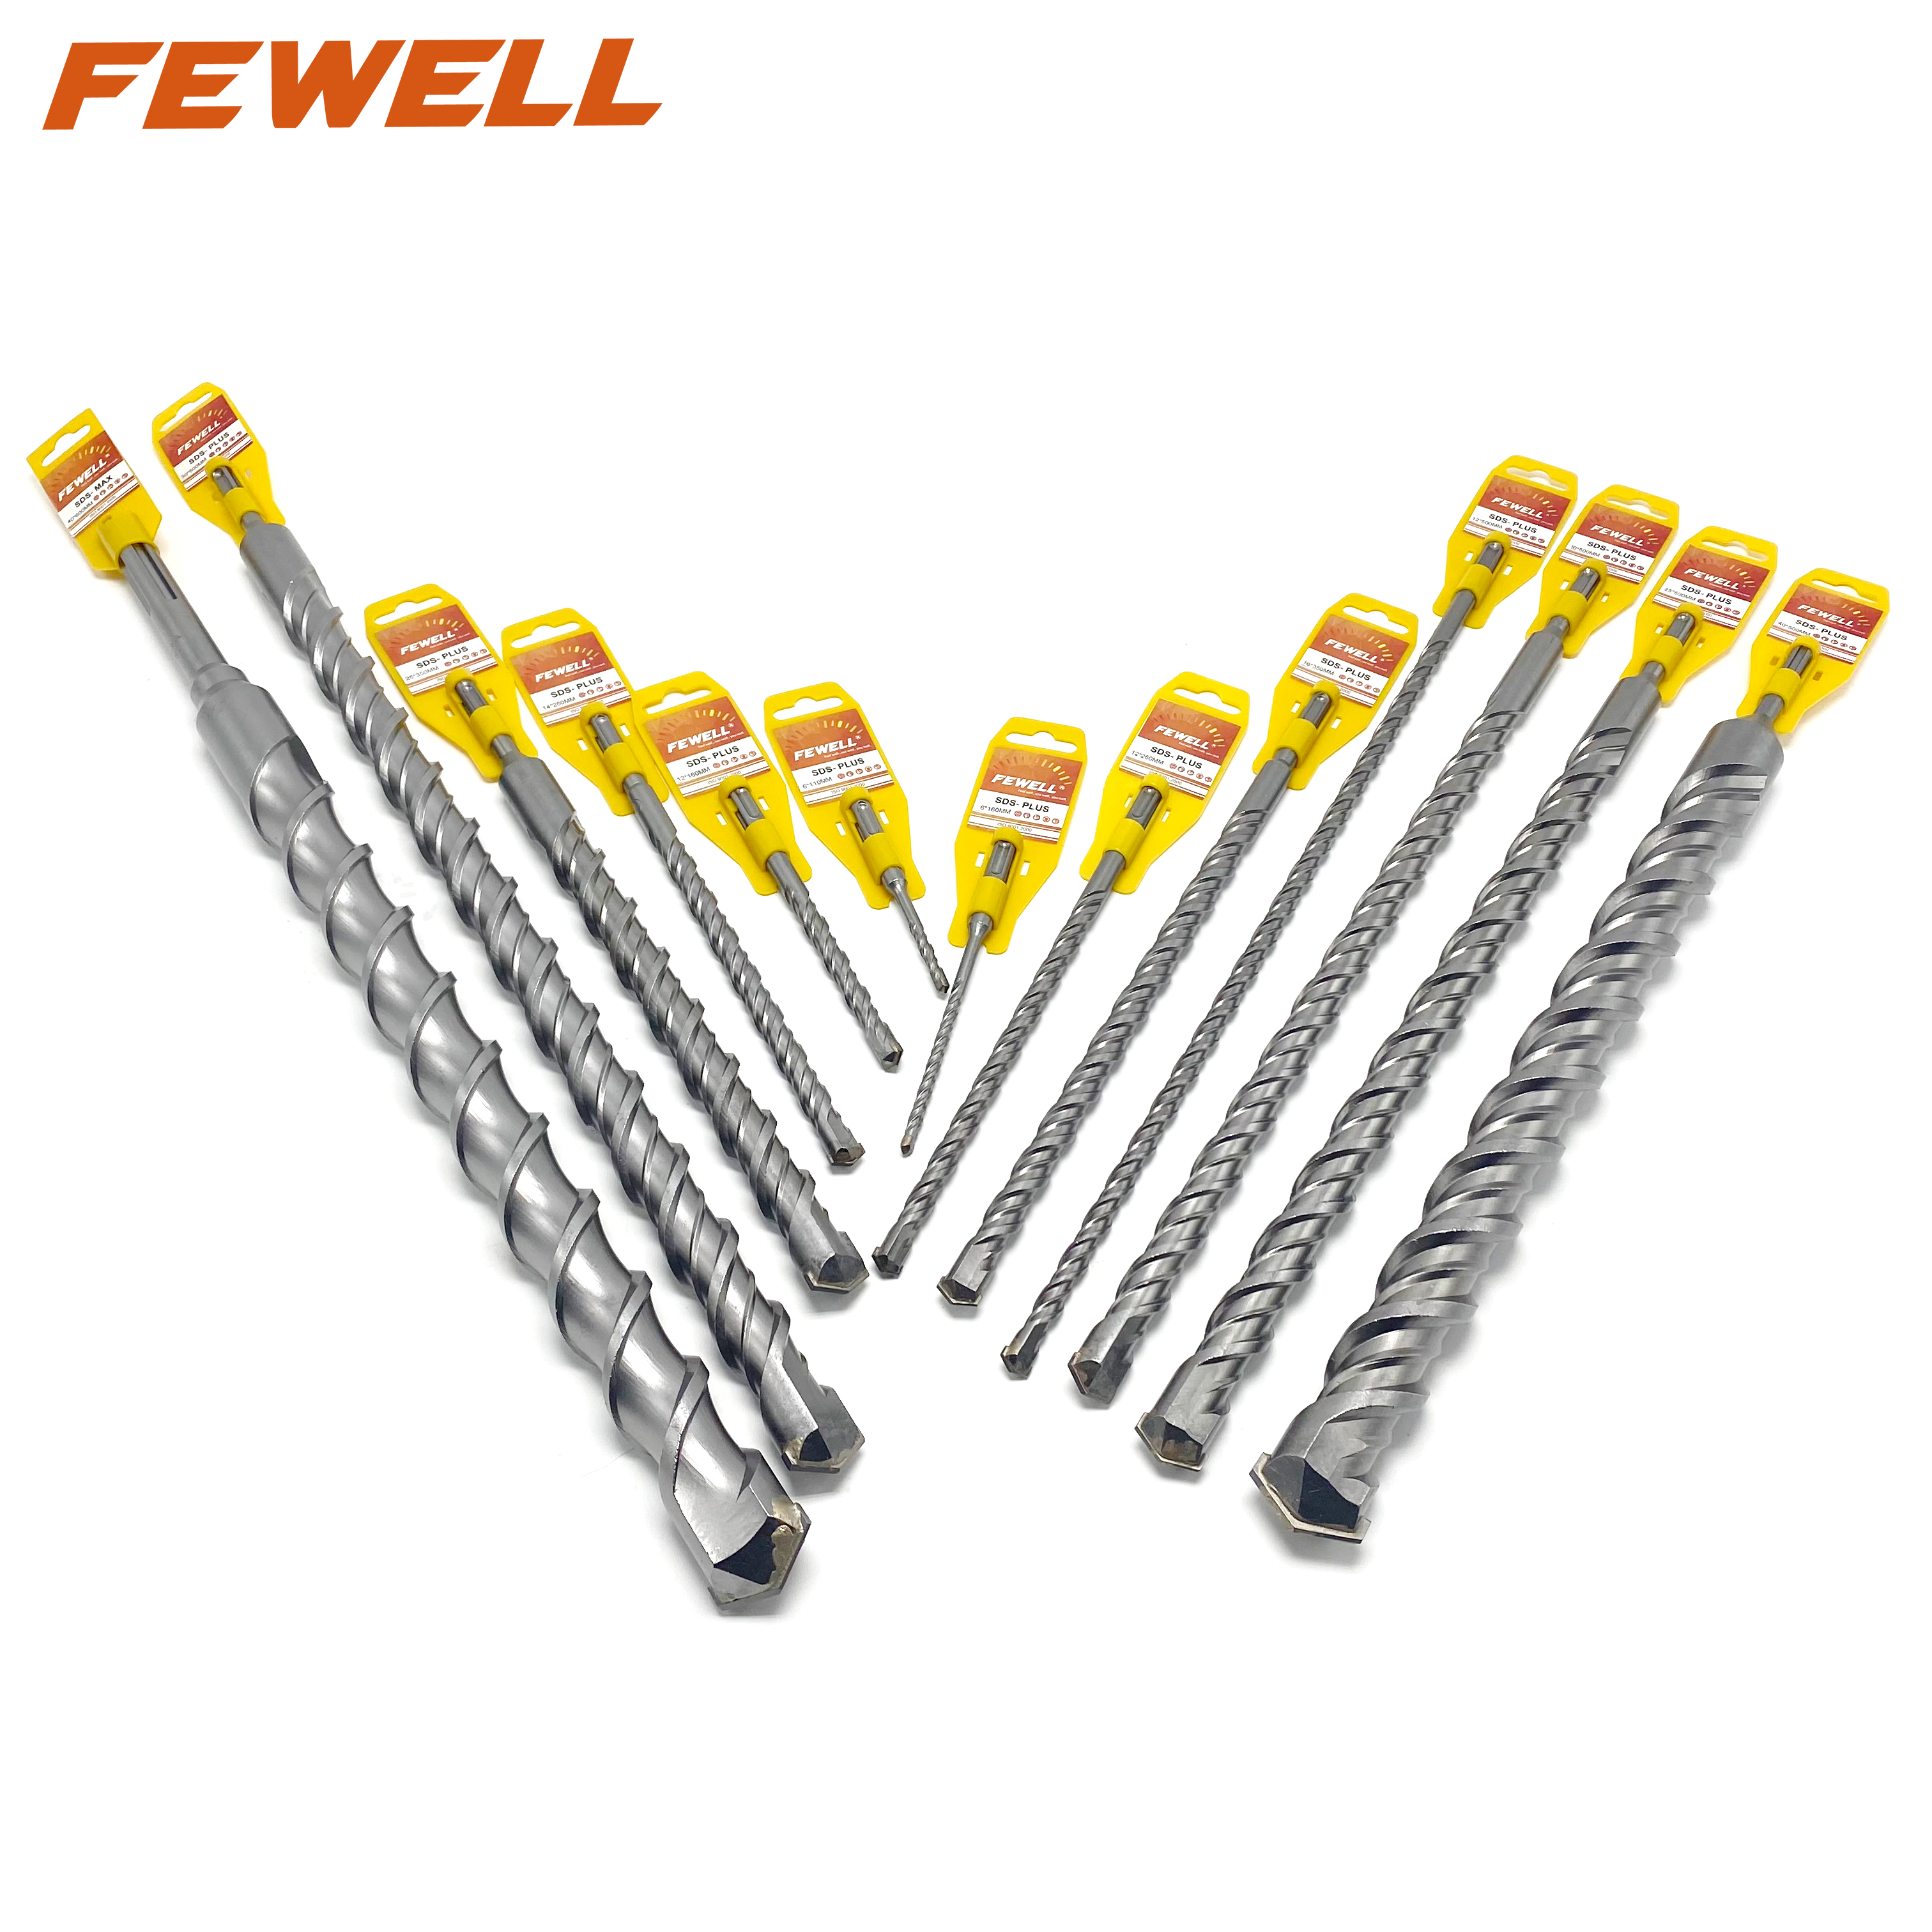  High quality SDS Plus Carbide Single Flat Tip 6.5mm Double Flute Electric hammer Drill Bit for Concrete wall Masonry Granite